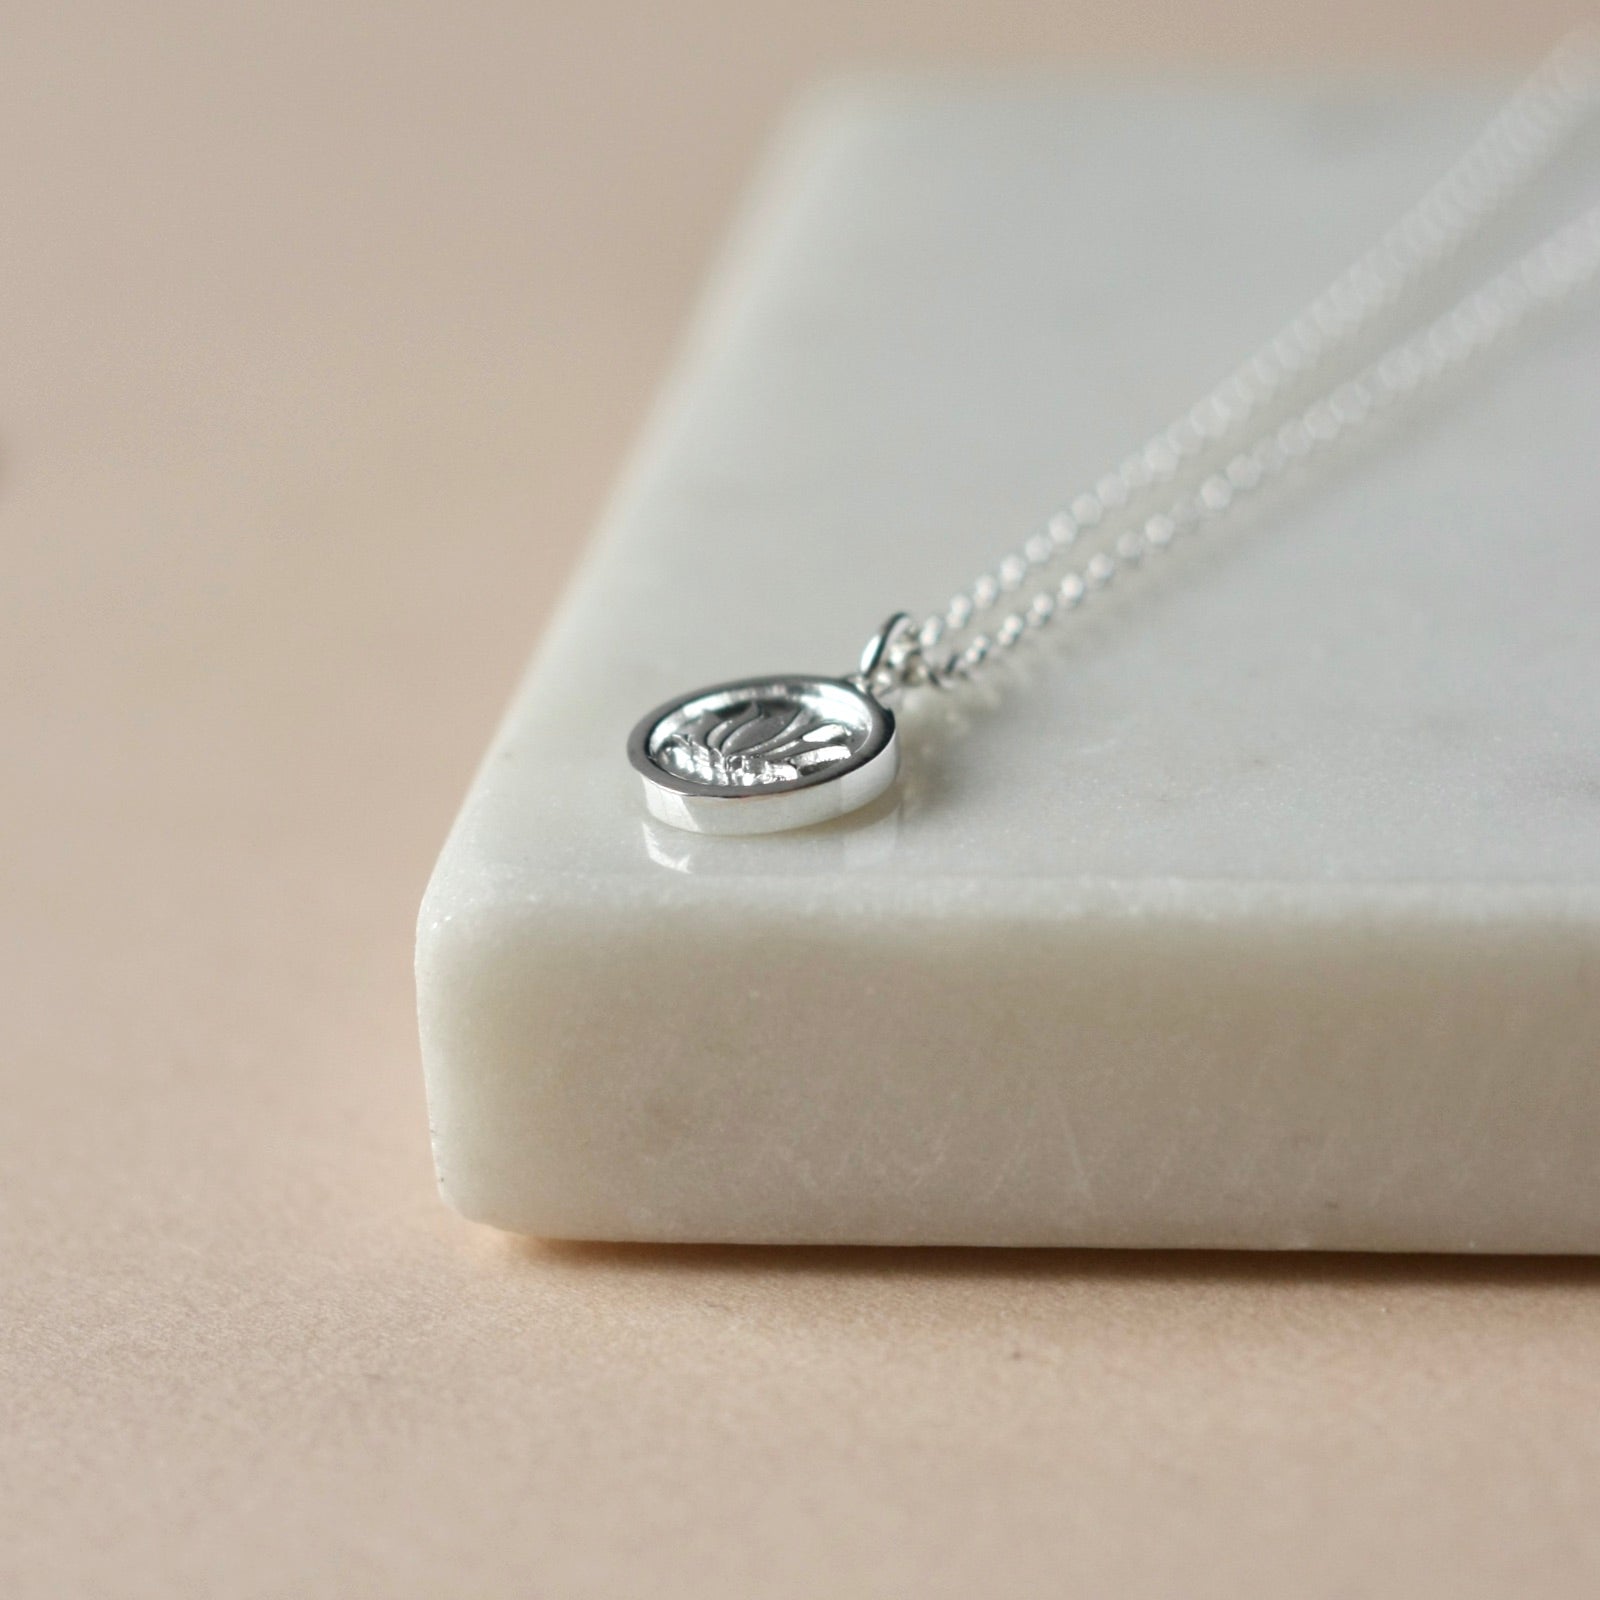 Silver Lotus Charm Necklace